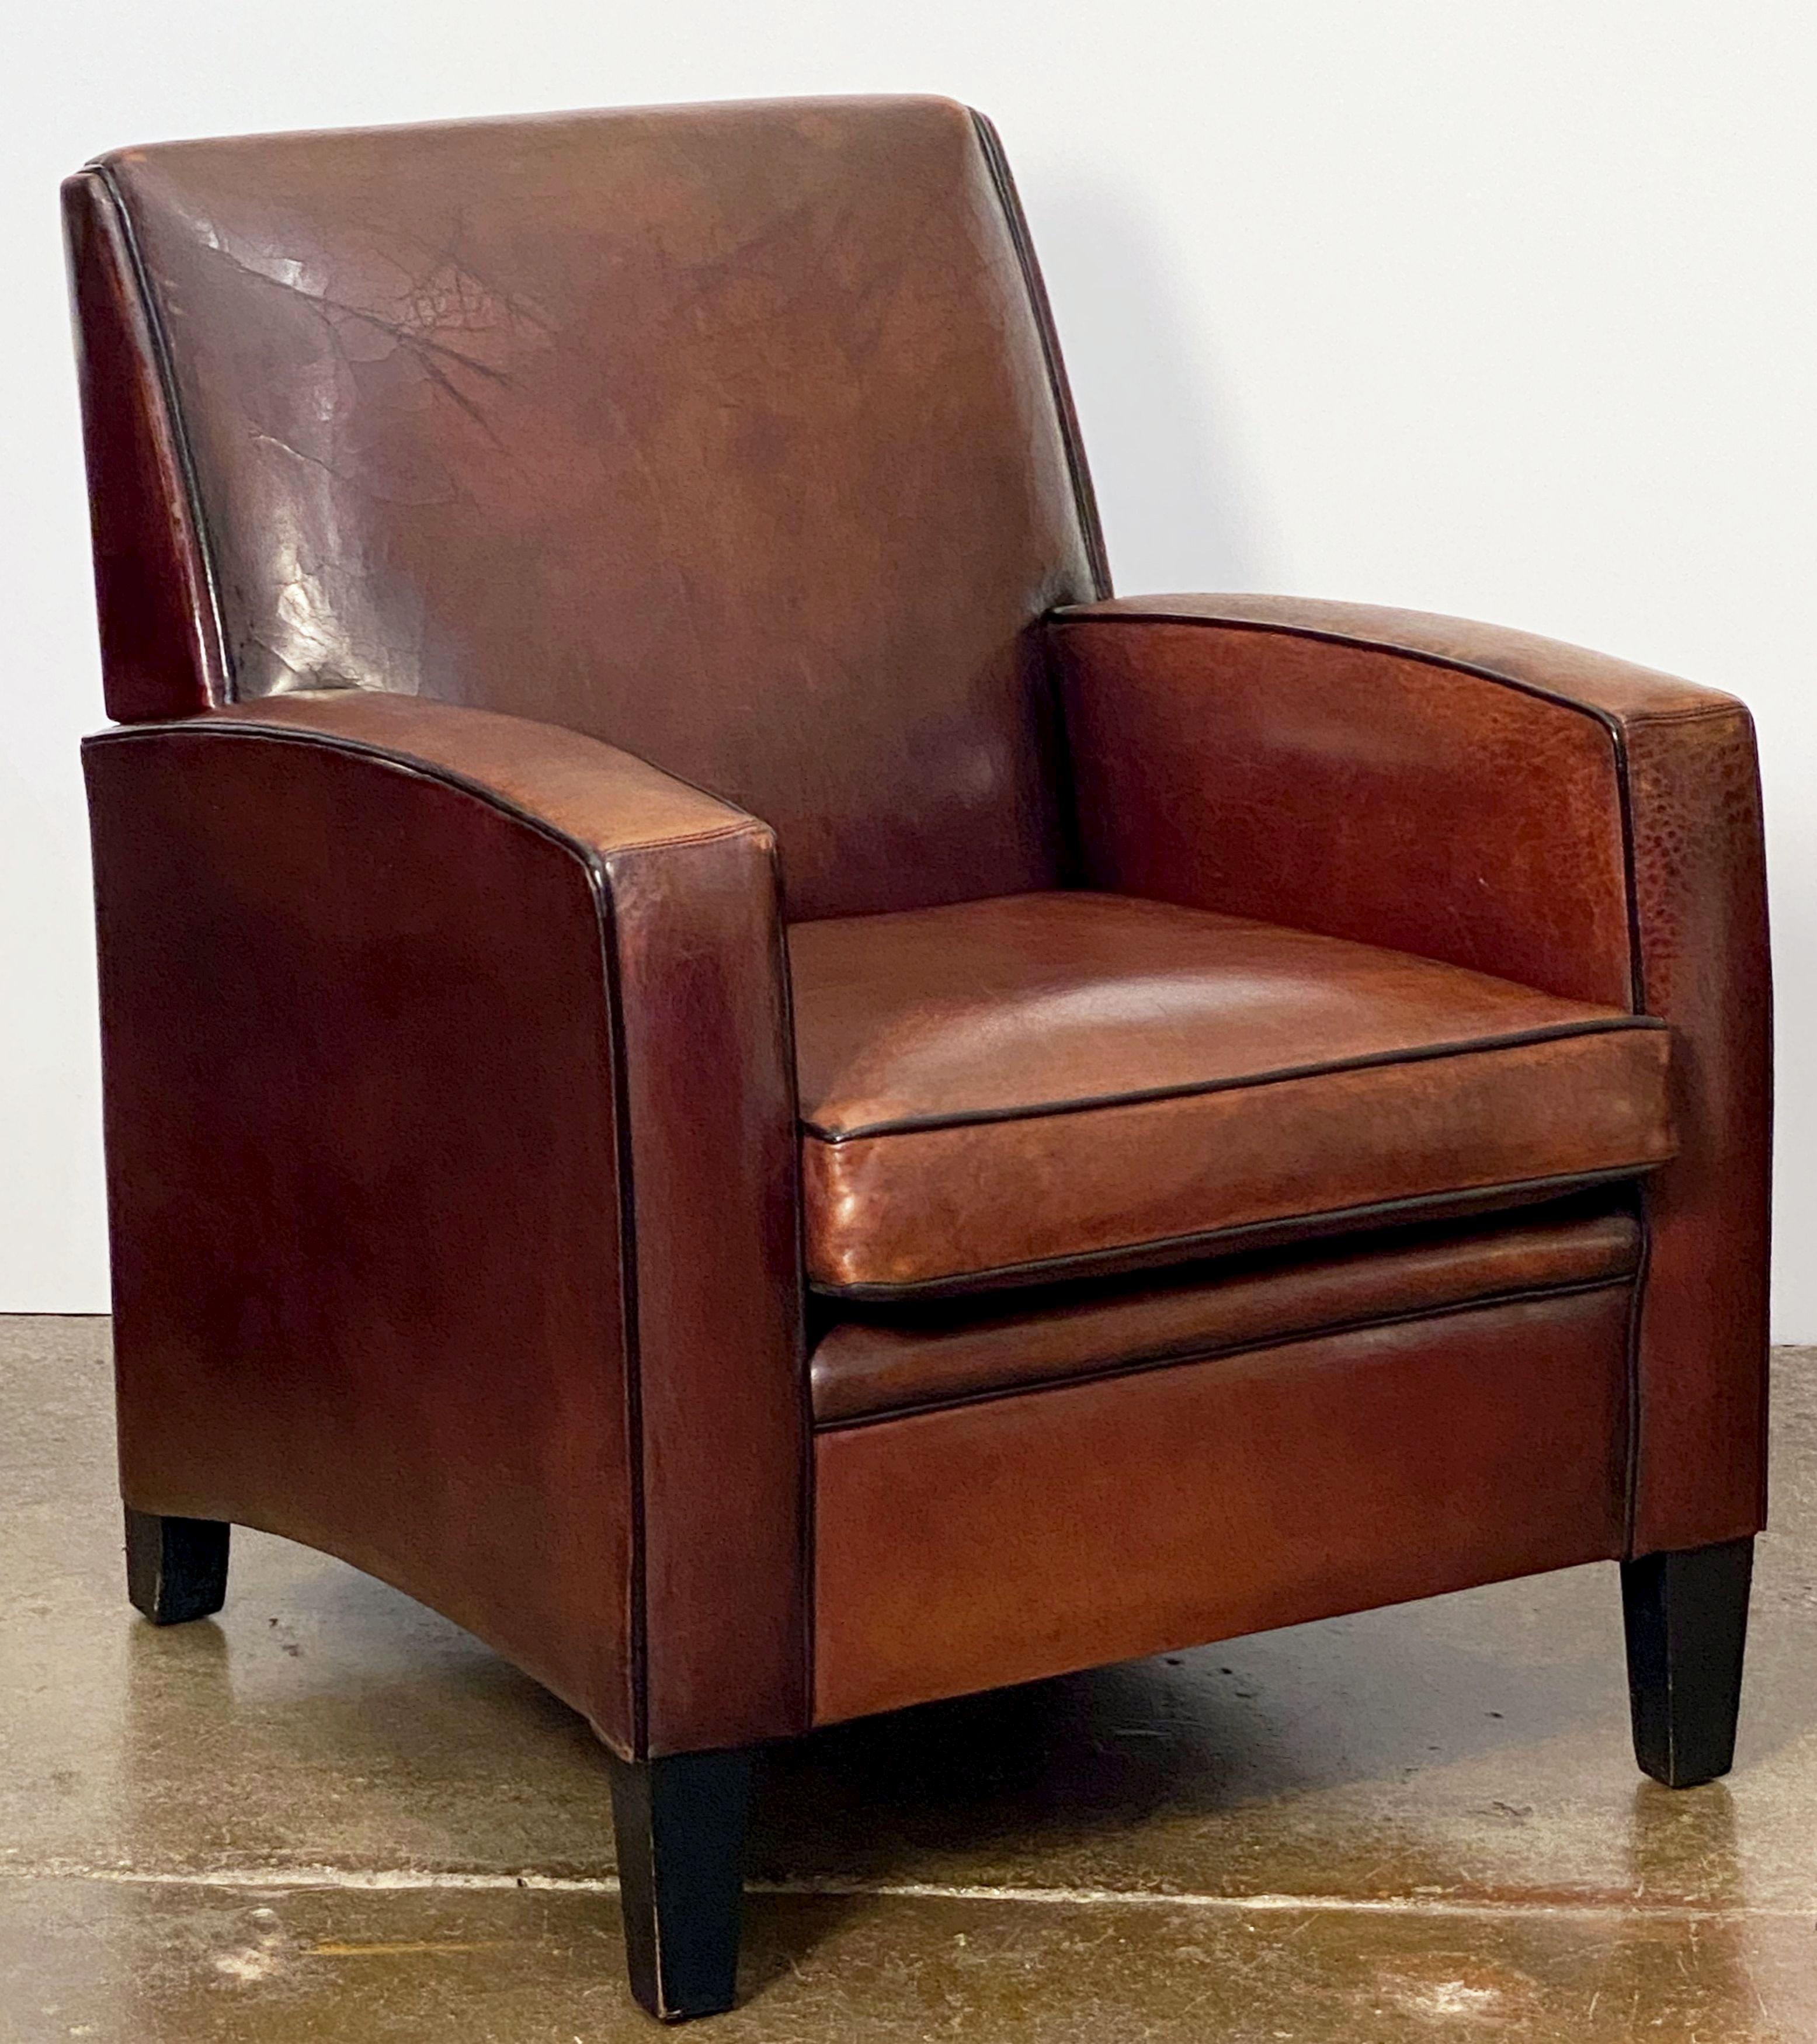 A handsome vintage Dutch leather-upholstered club or lounge chair, in the Art Deco style, featuring a comfortable back and seat with removable cushion, stylish arms, original leather, and resting on shaped feet.

Measures: Seat height is 19 inches.